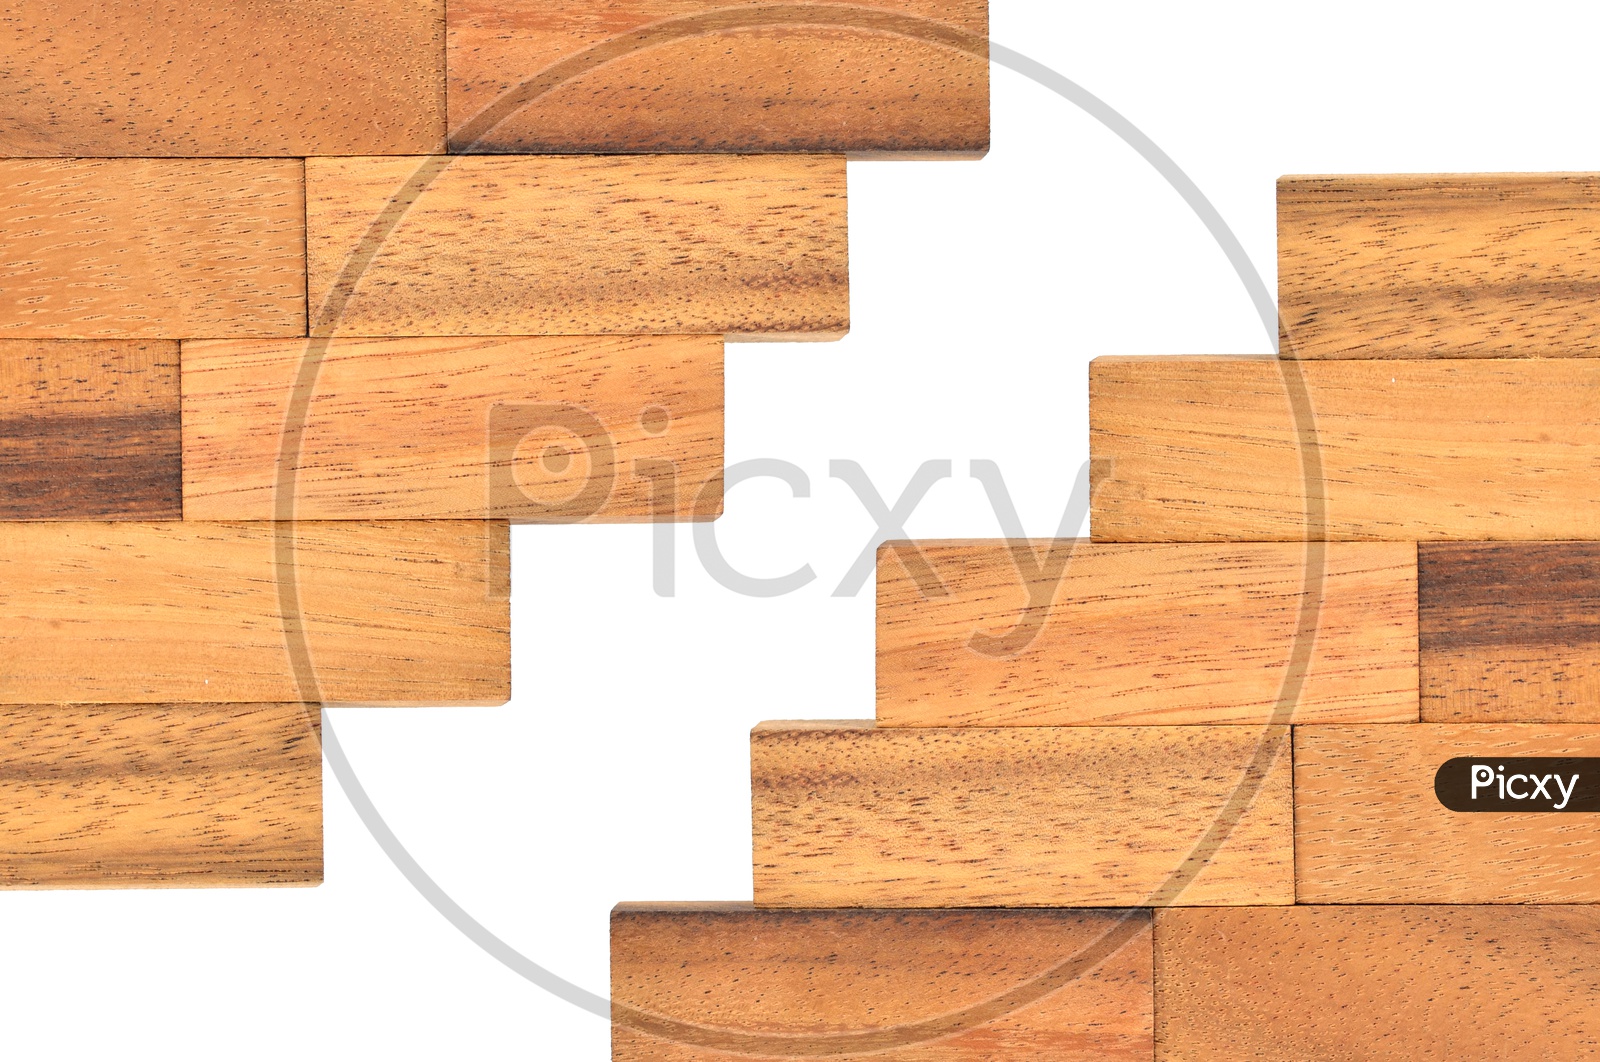 Illustration Template With Wooden Plank Patterns Over isolated White Background